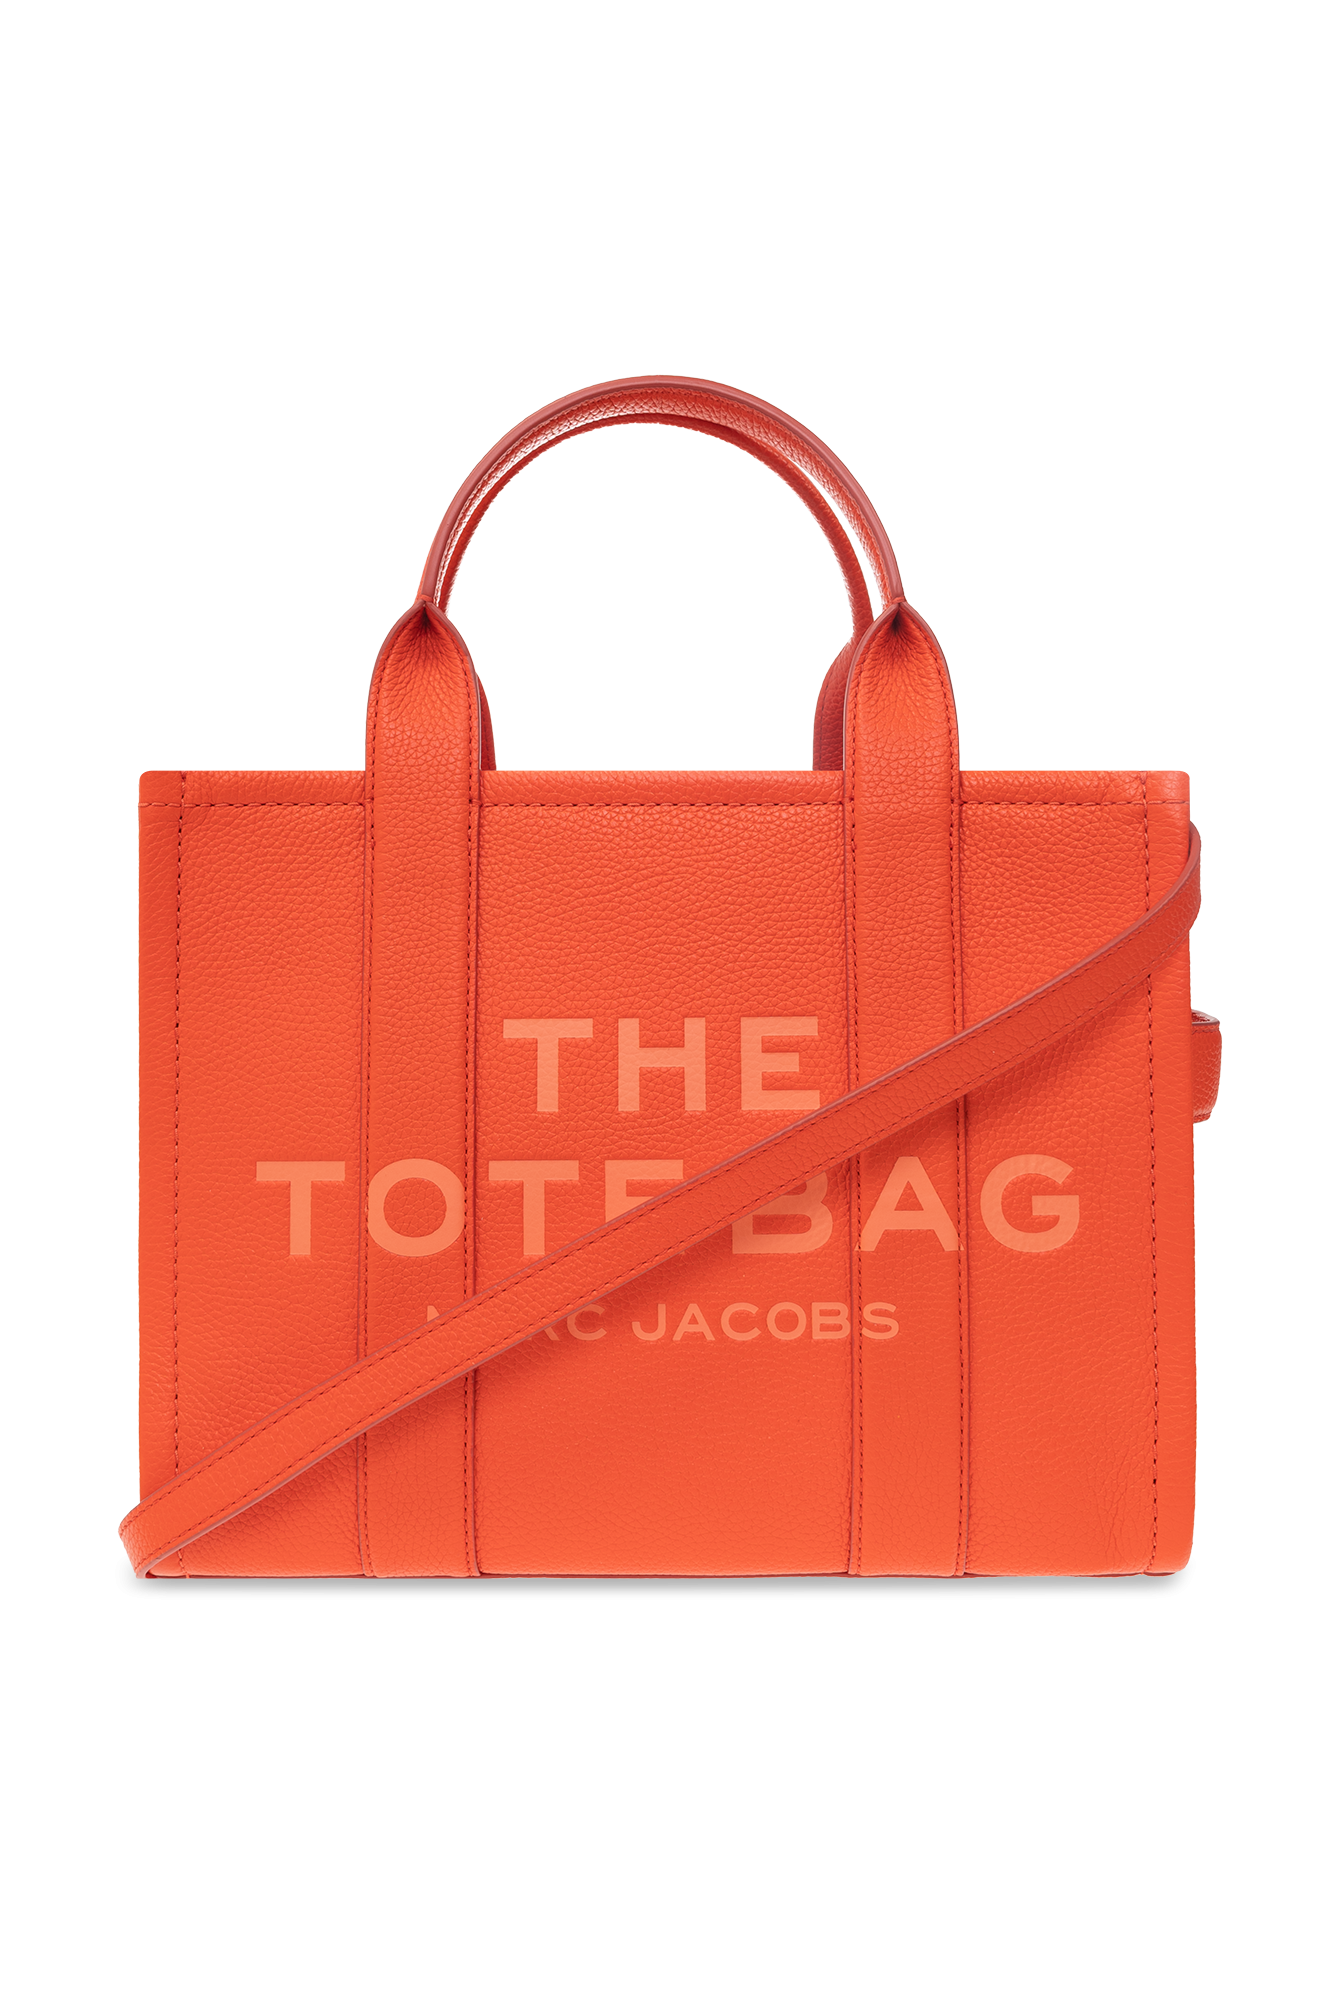 MARC JACOBS: The Tote Bag in leather - Beige  Marc Jacobs tote bags  H004L01PF21 online at